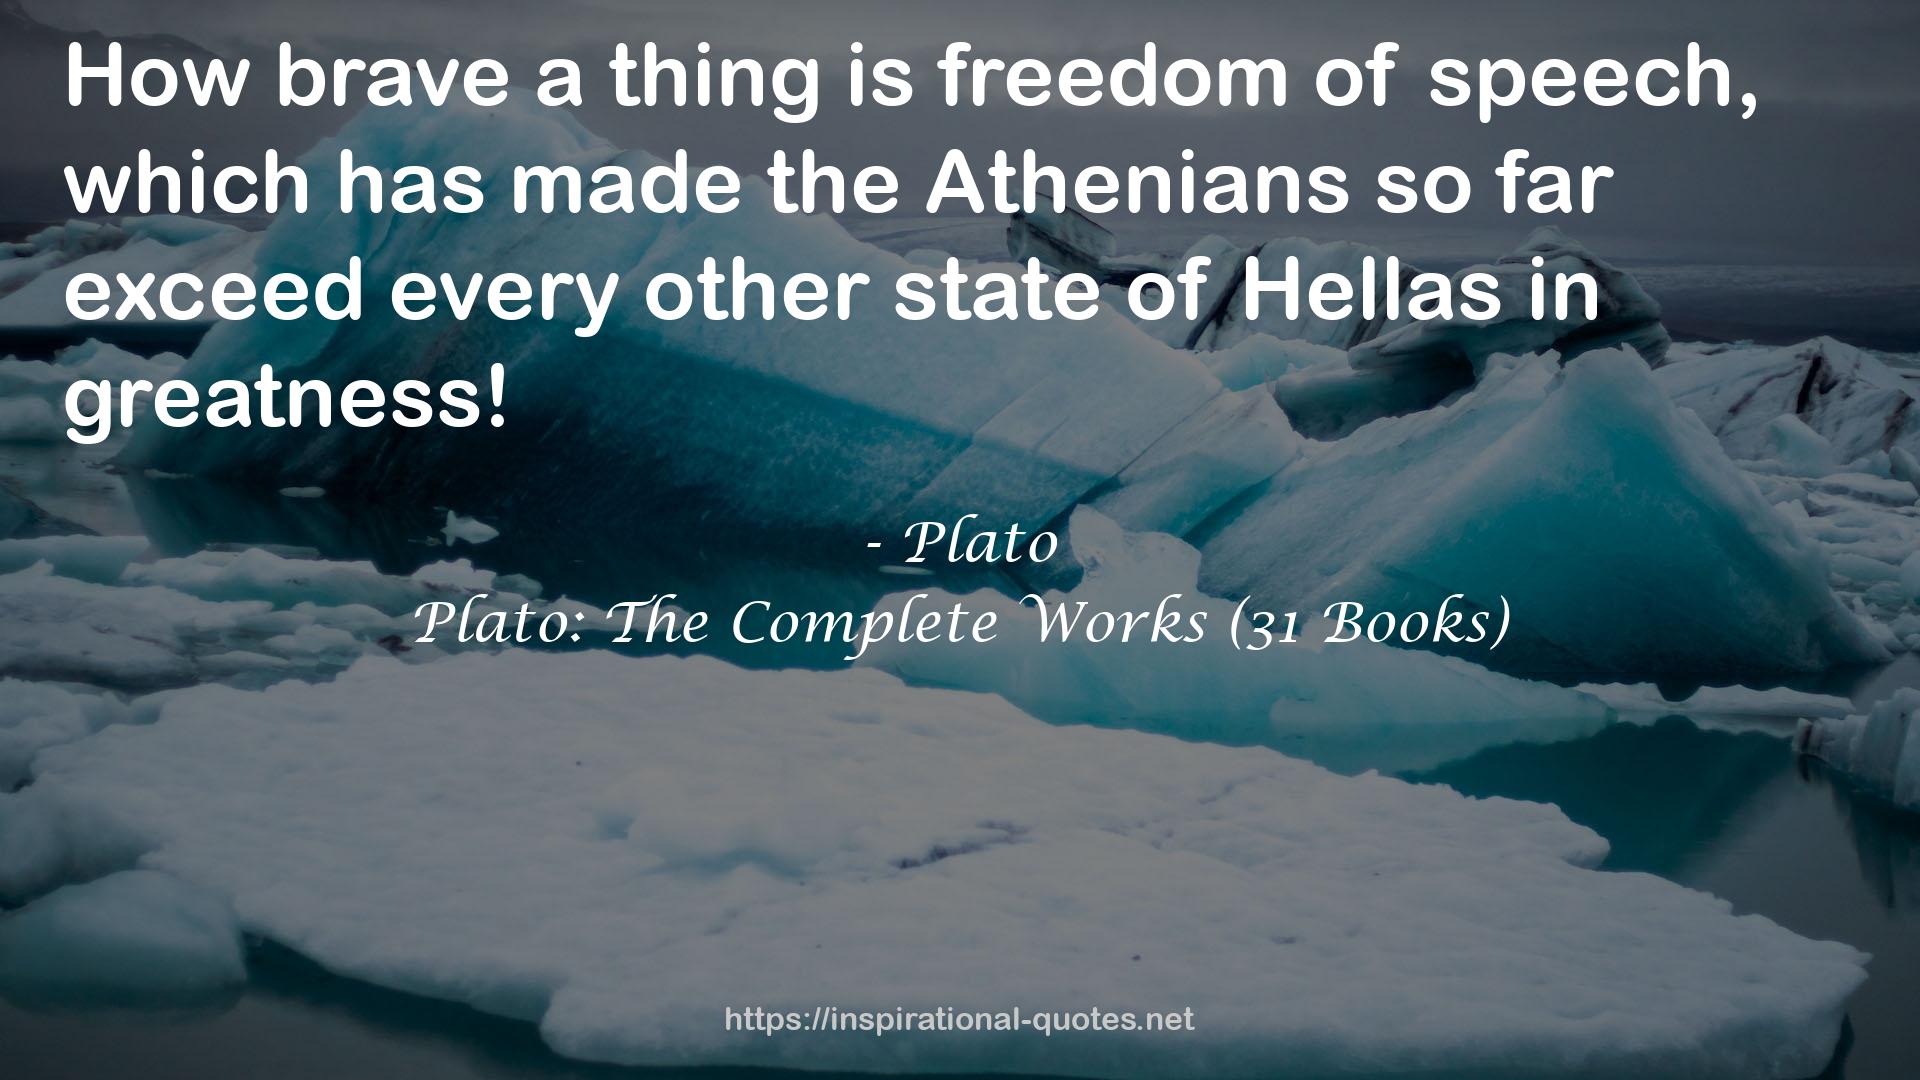 Plato: The Complete Works (31 Books) QUOTES